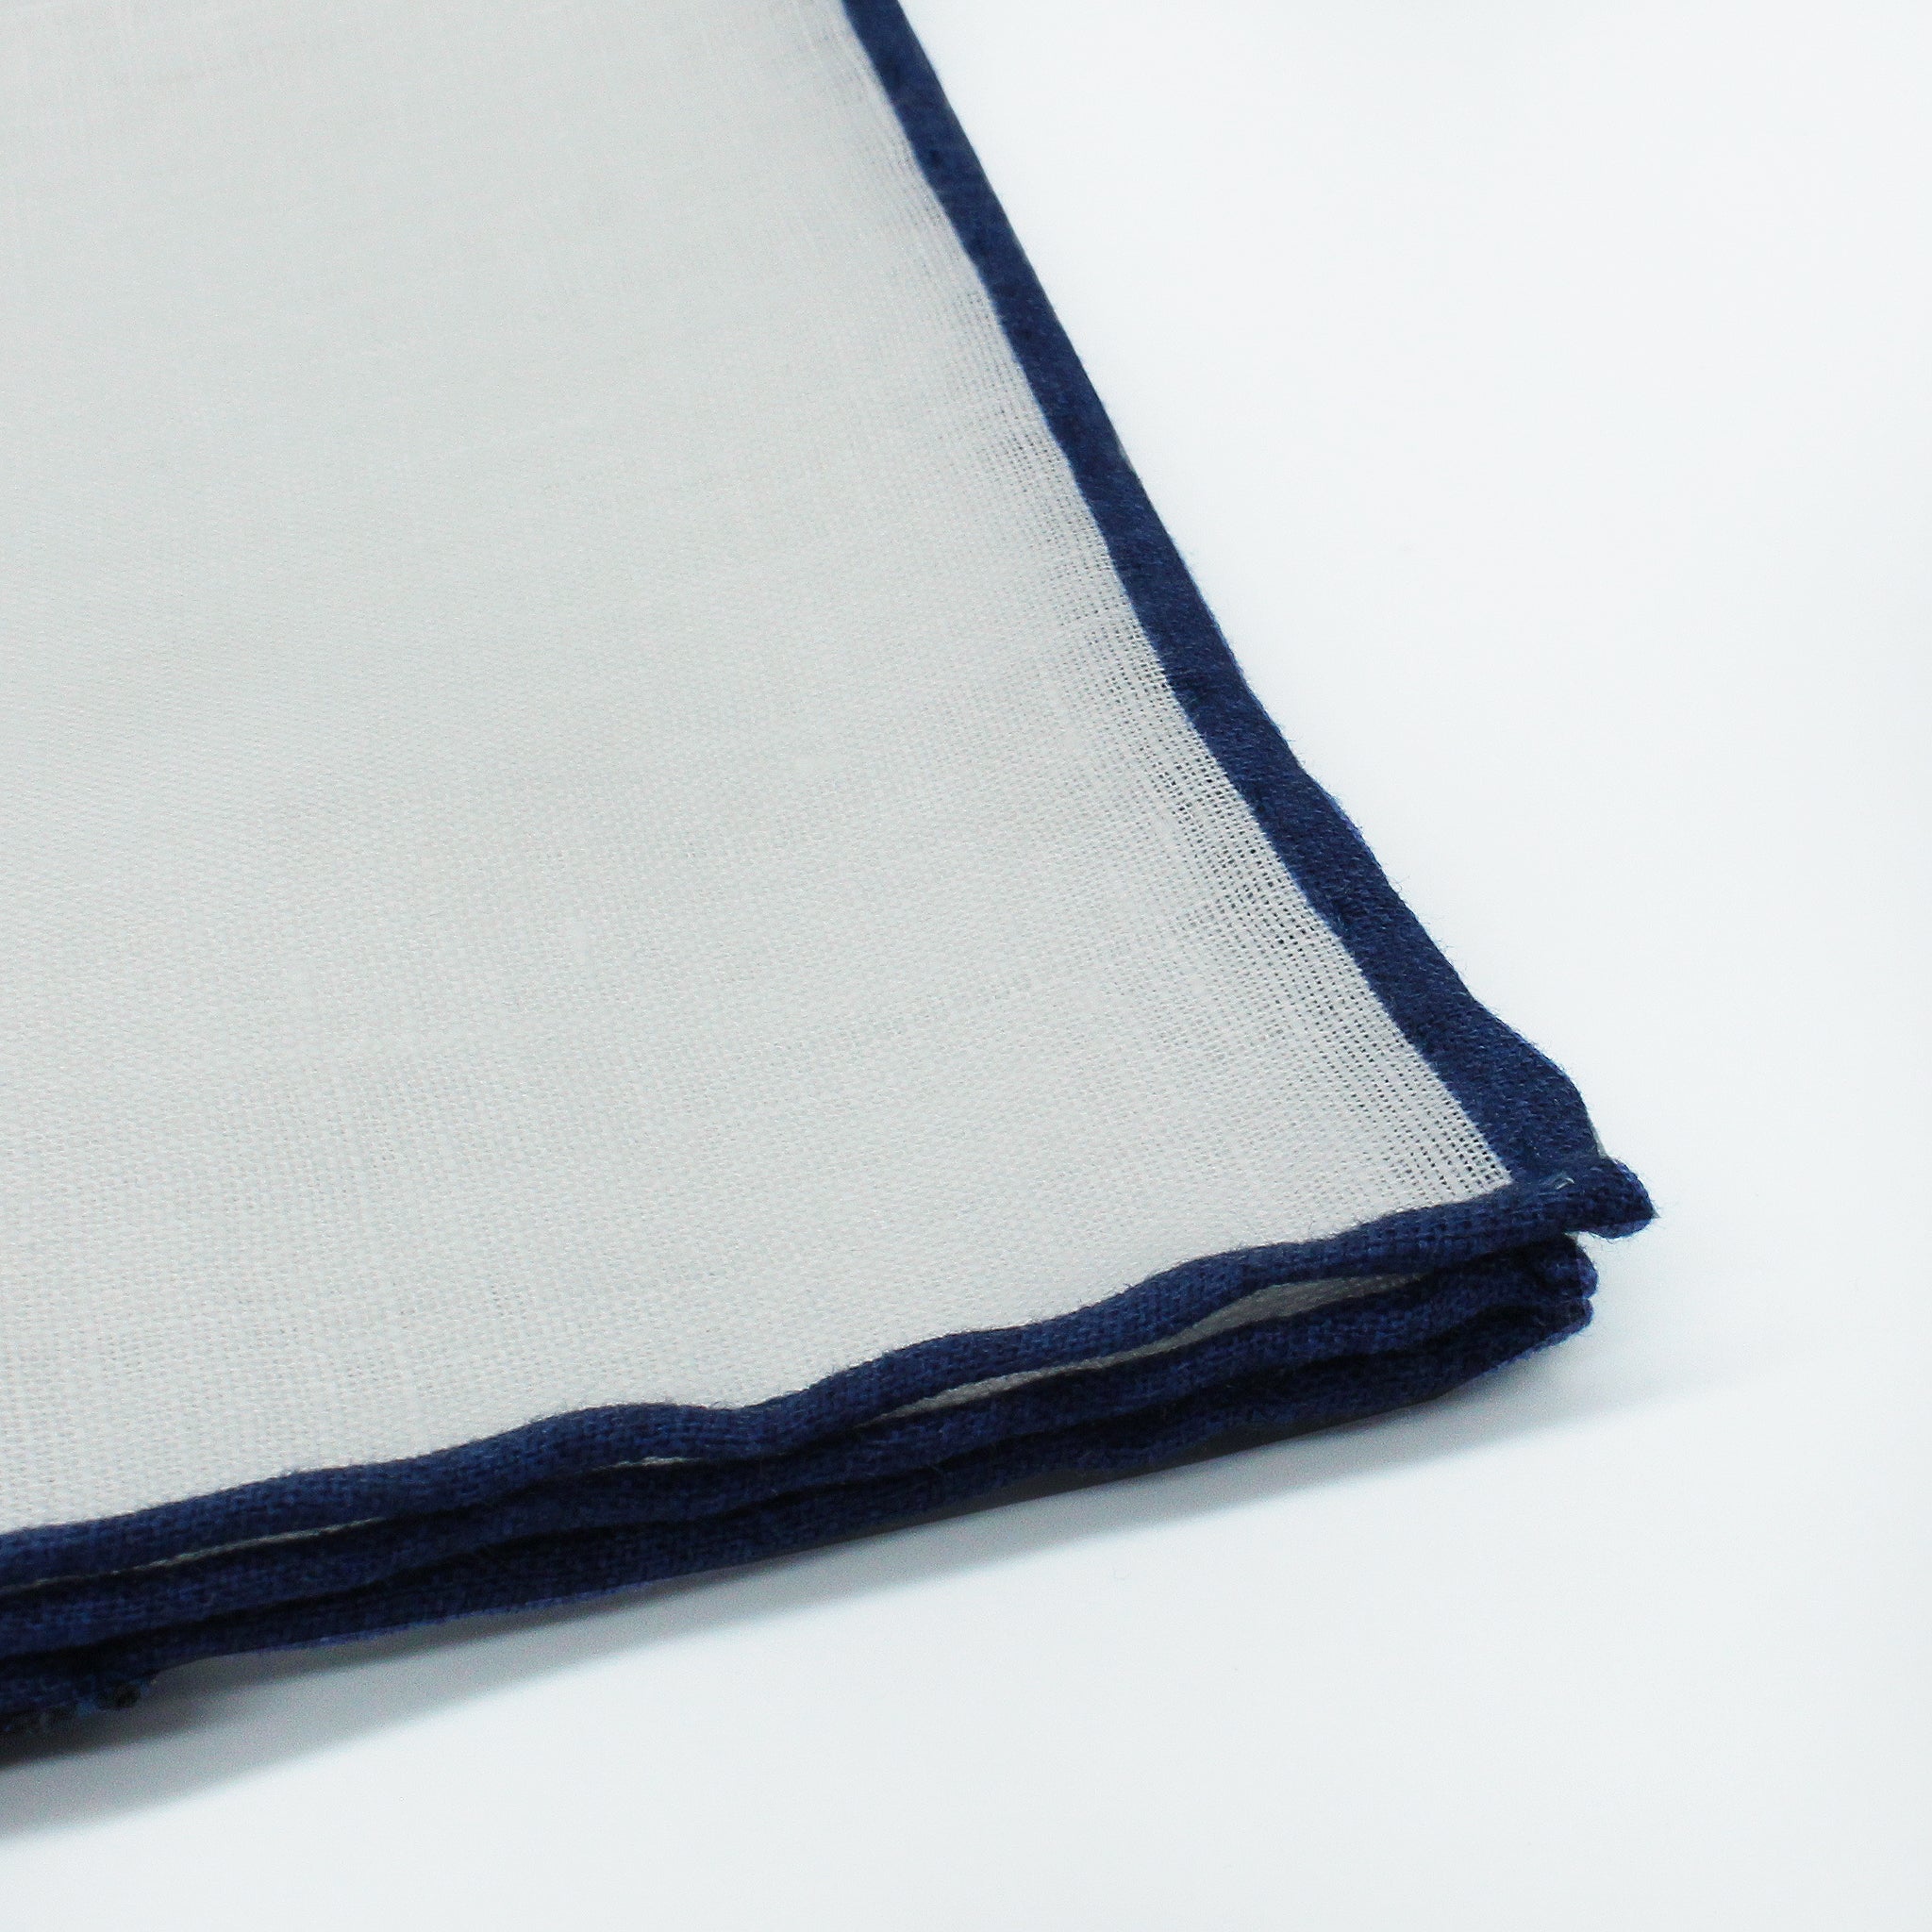 Linen pocket square with white background and blu border